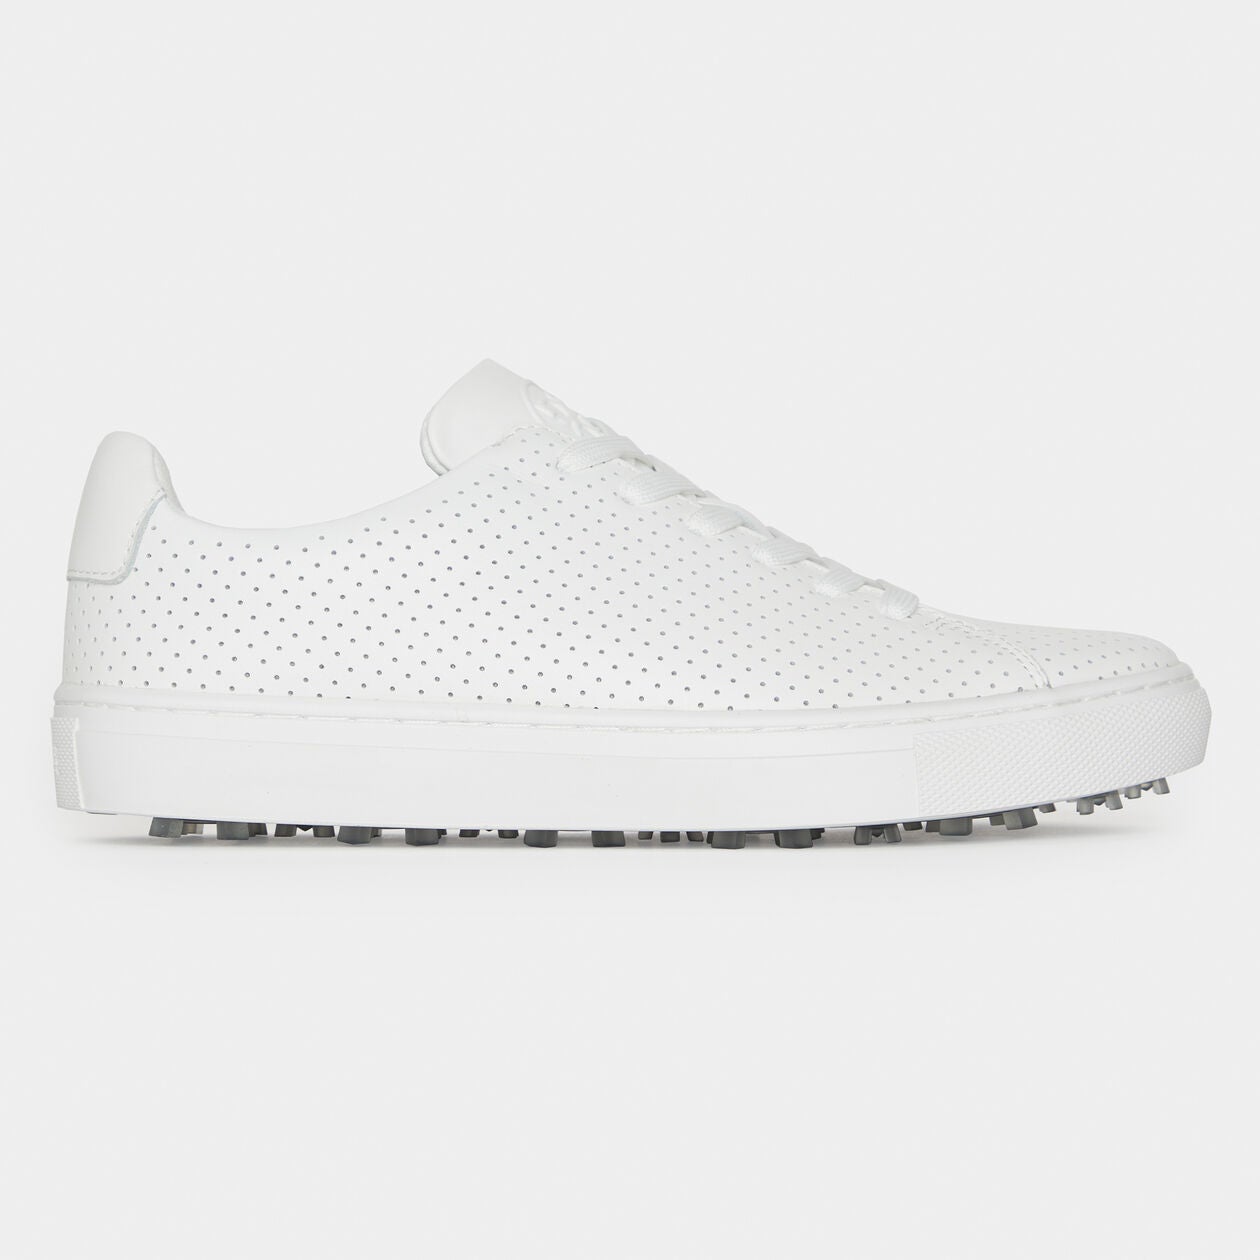 Perforated women's golf shoes